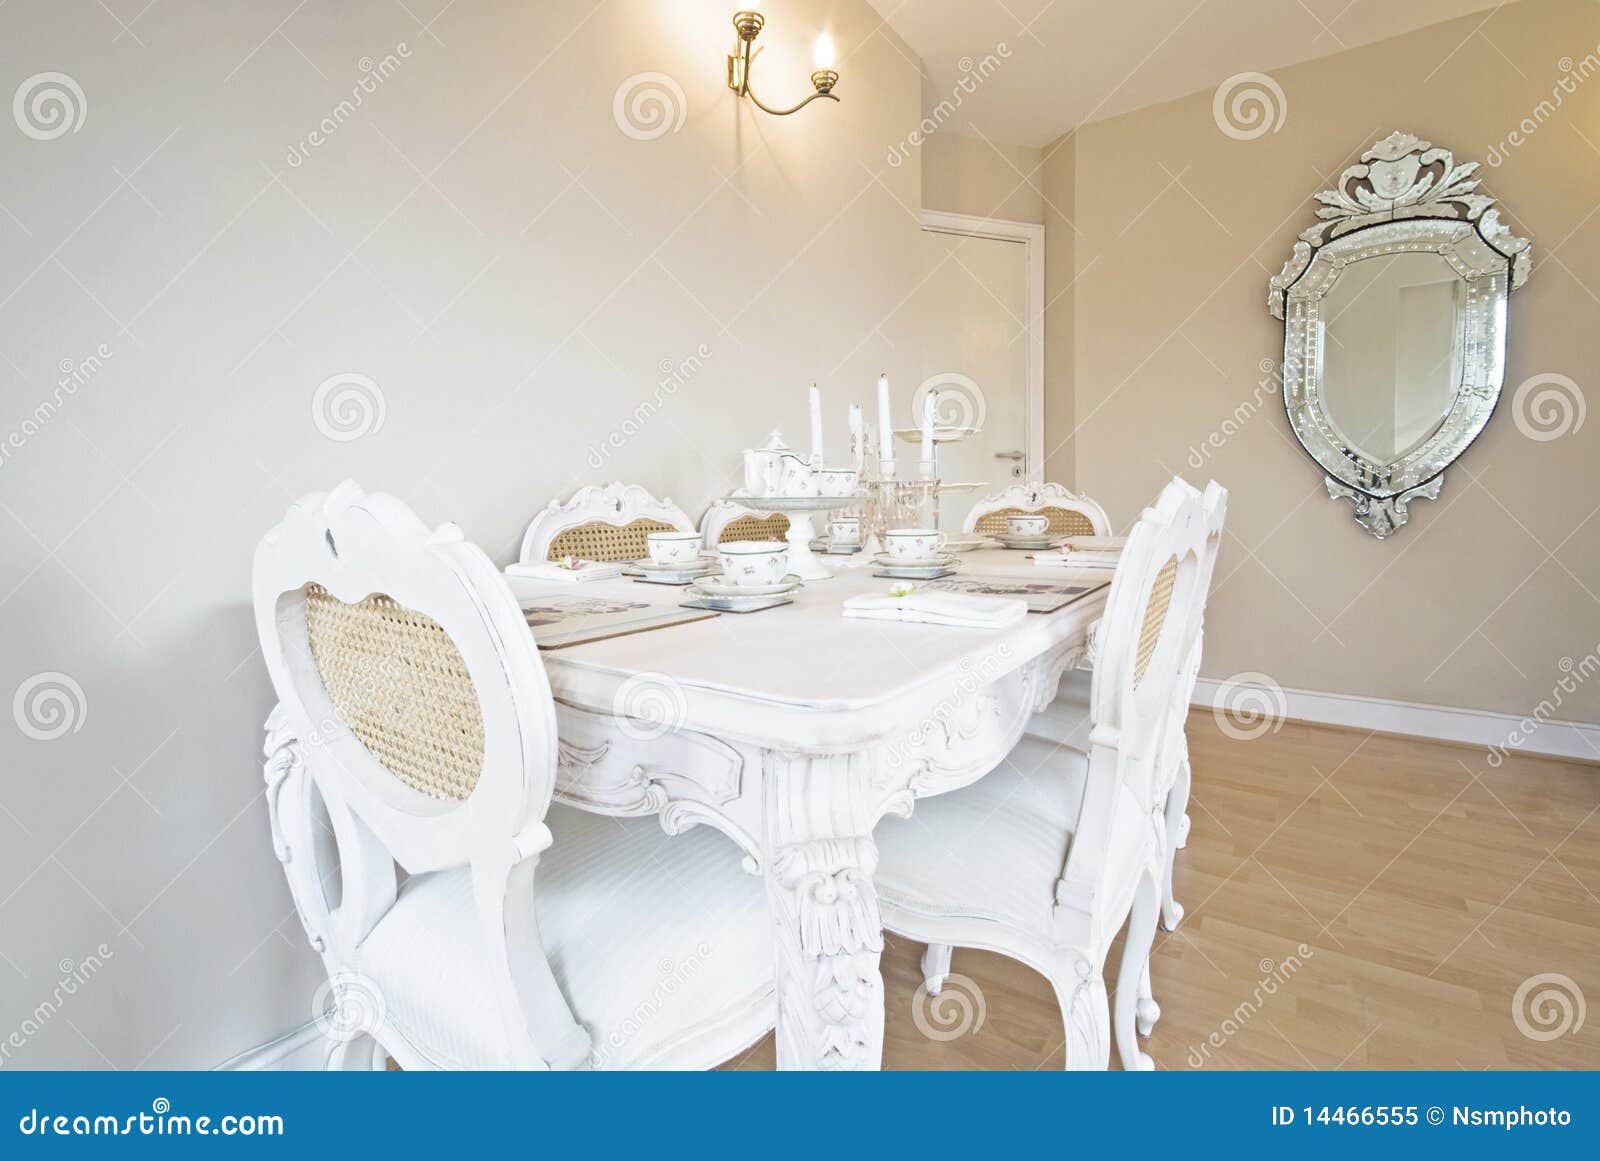 classy ancient style dining room